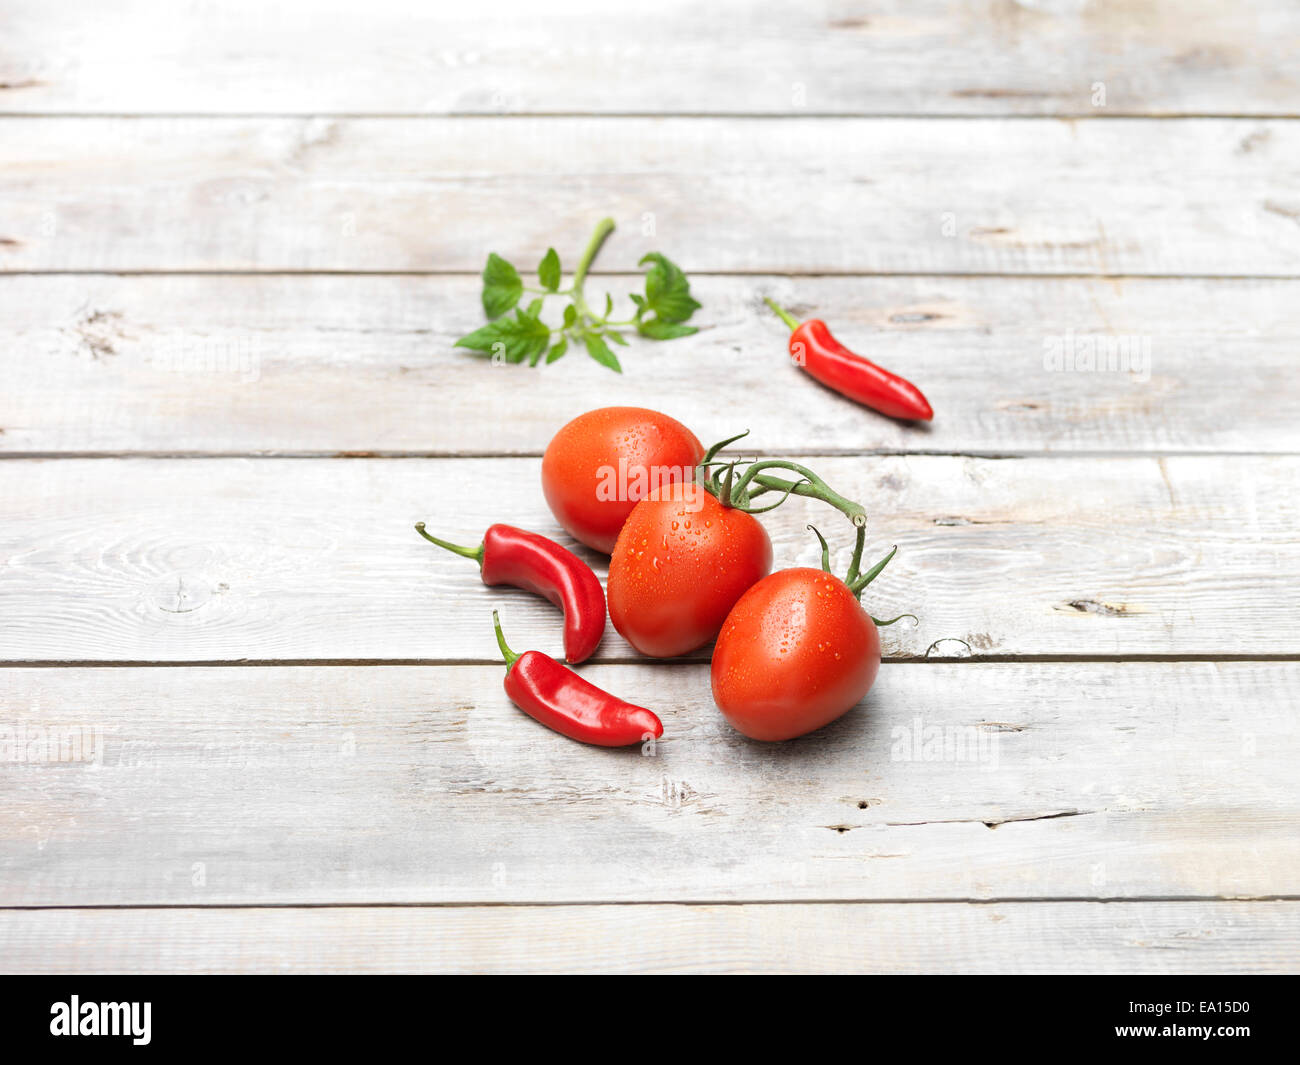 Red chilli, juicy sweet tomatoes, raw green basil Stock Photo